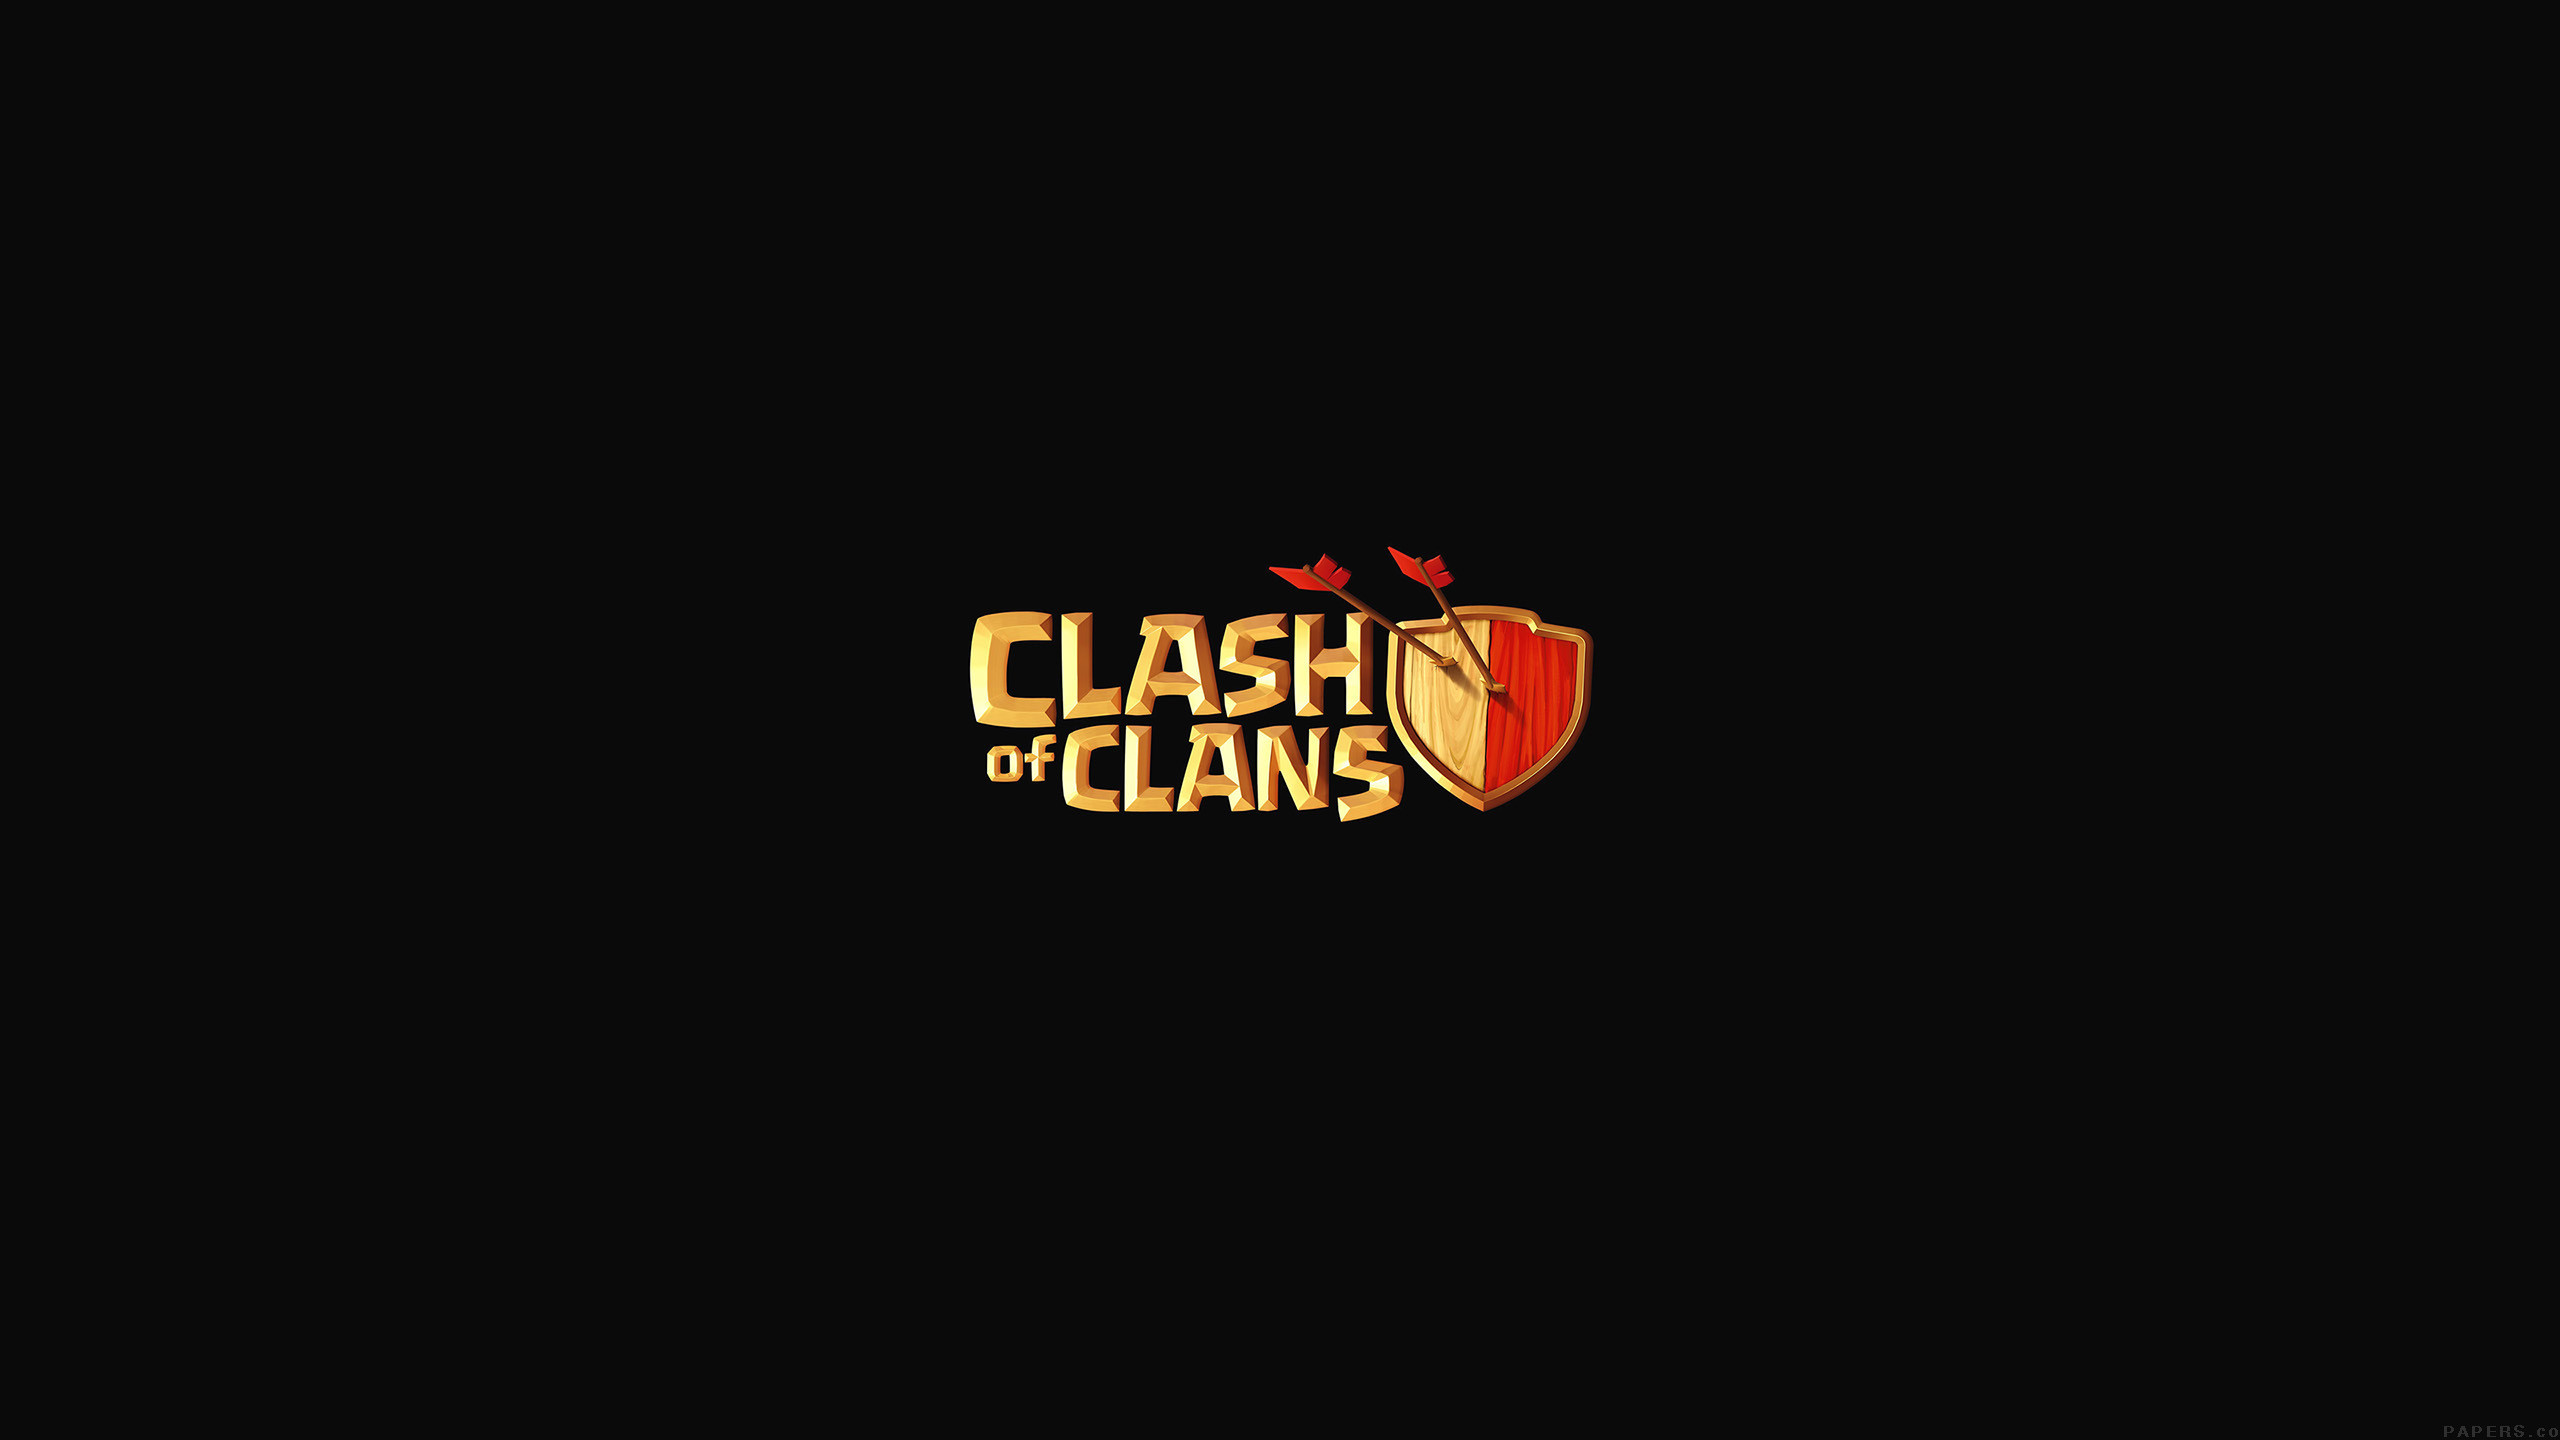 2560x1440 Clash of Clans Logo Wallpaper Background 49063